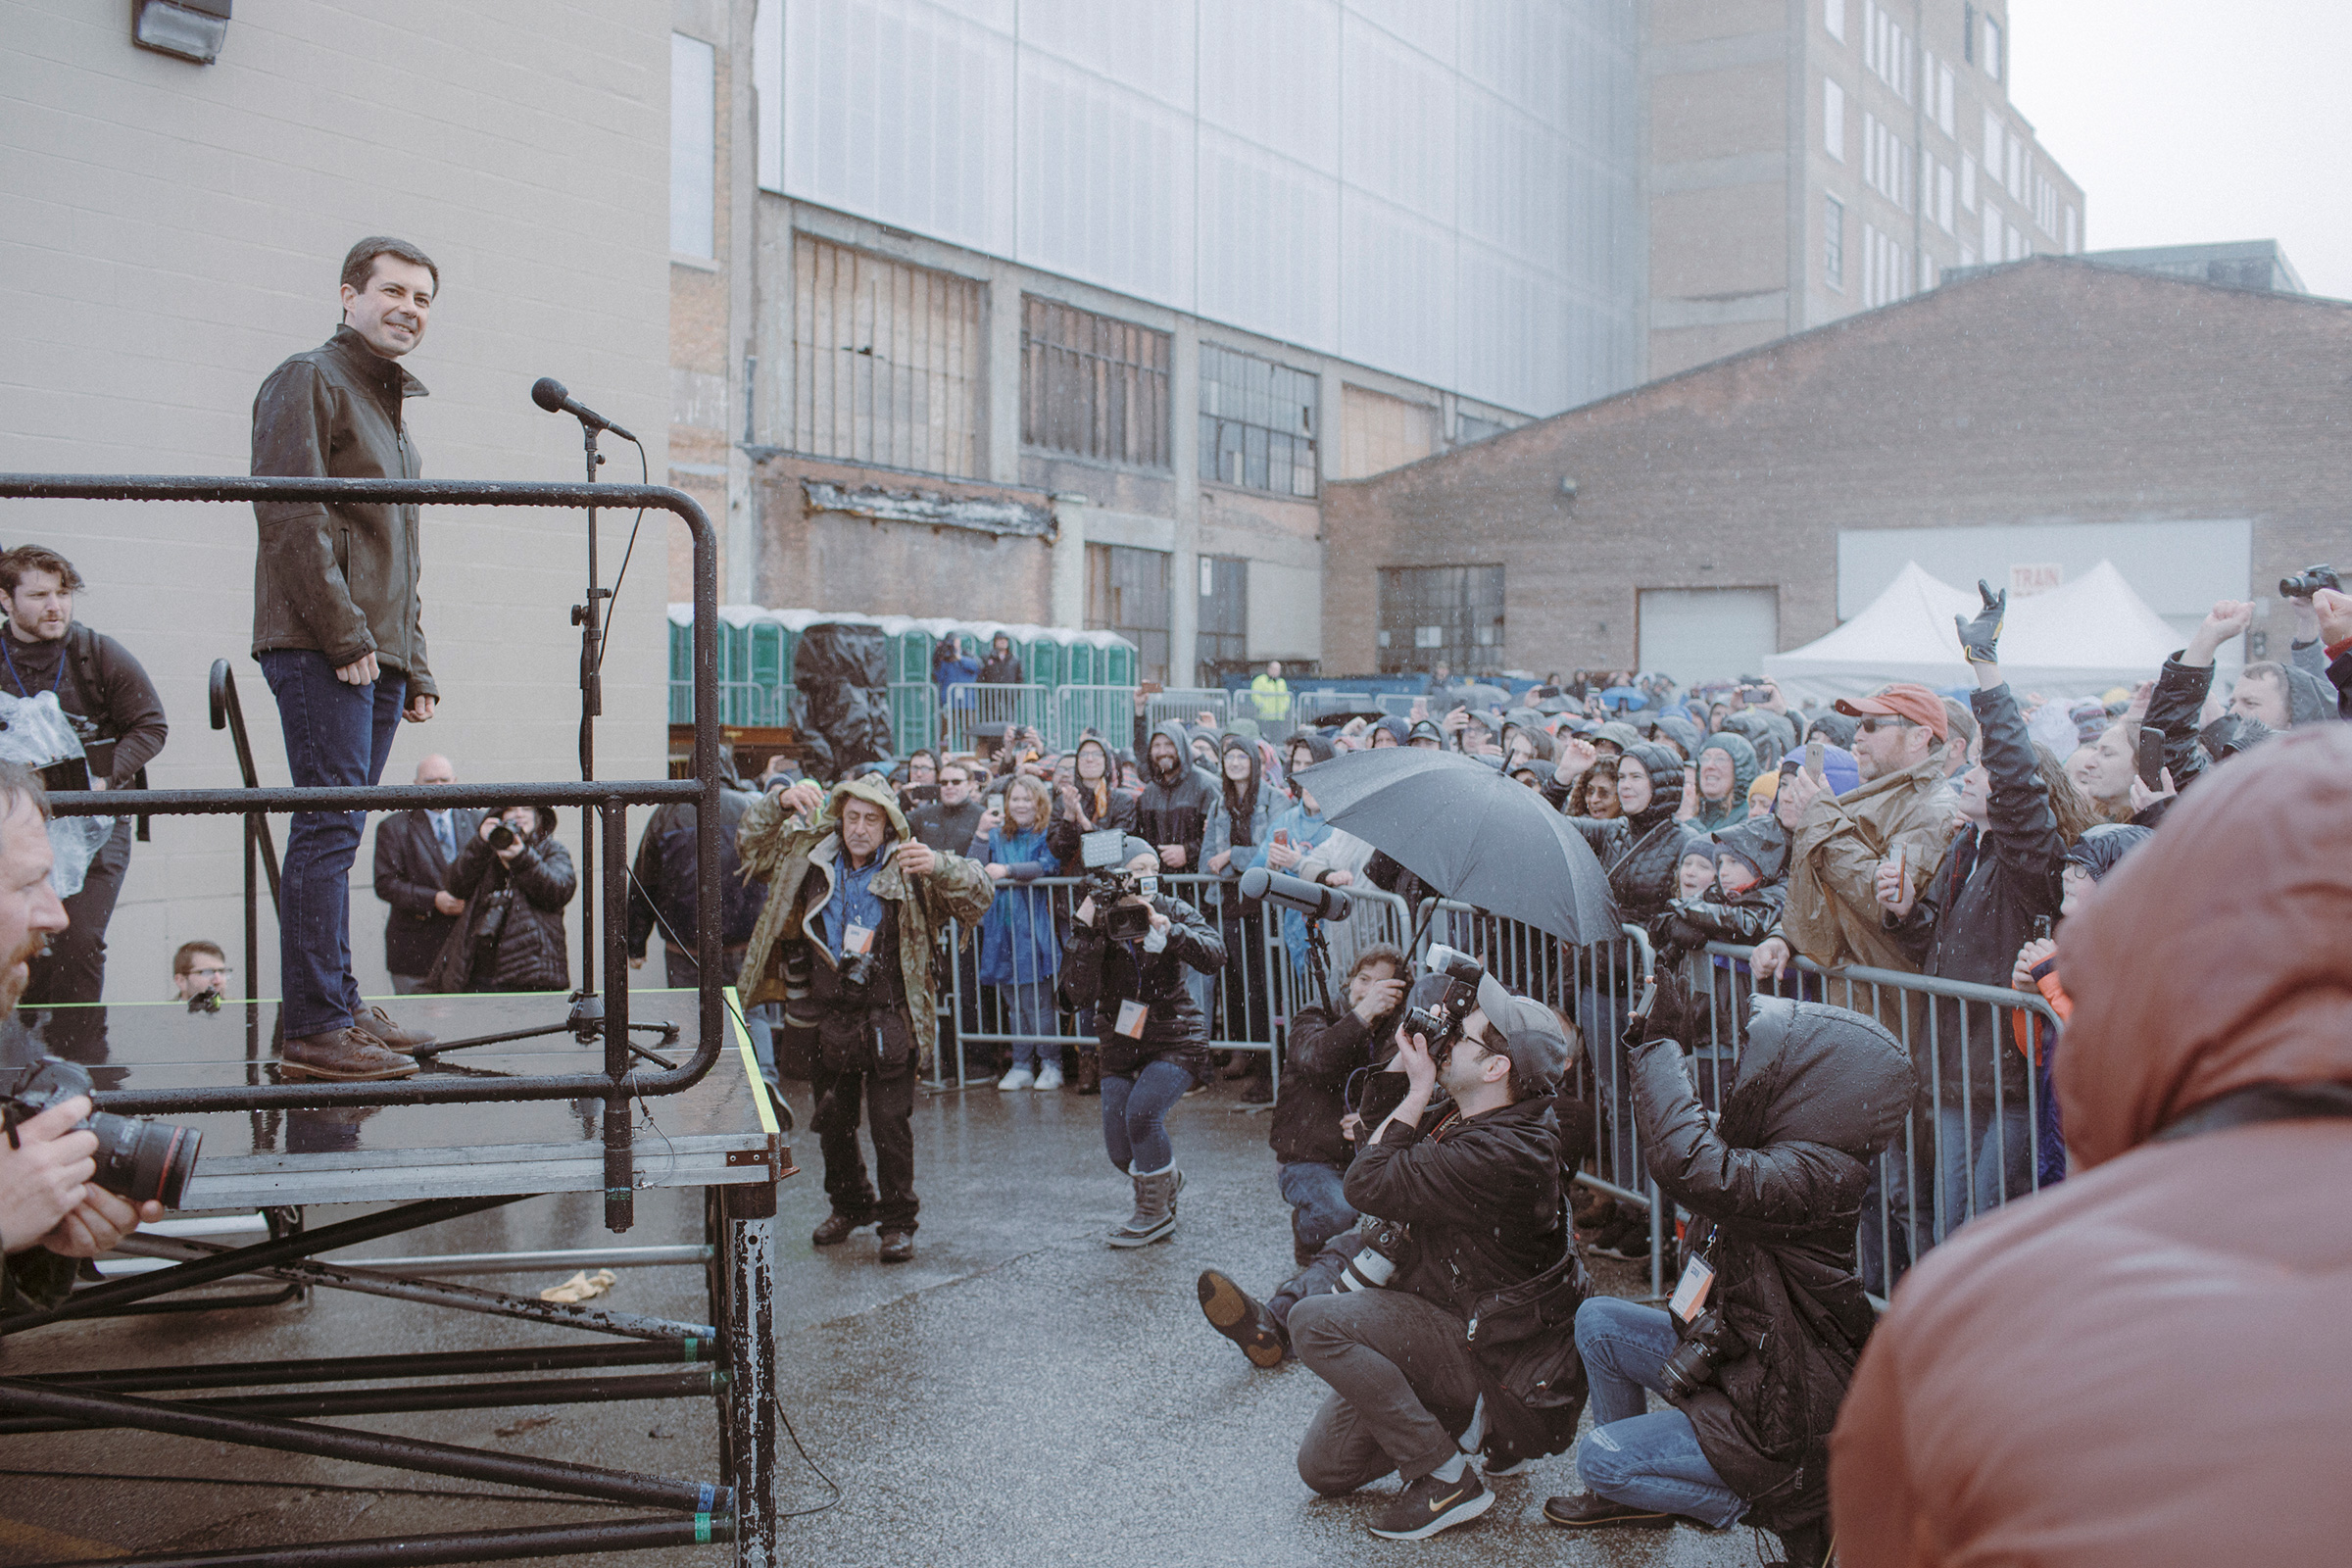 Mayor Pete Buttigieg greets the overflow crowd of supporters waiting in the rain on April 14 outside his presidential campaign announcement in South Bend. (Elliot Ross for TIME)